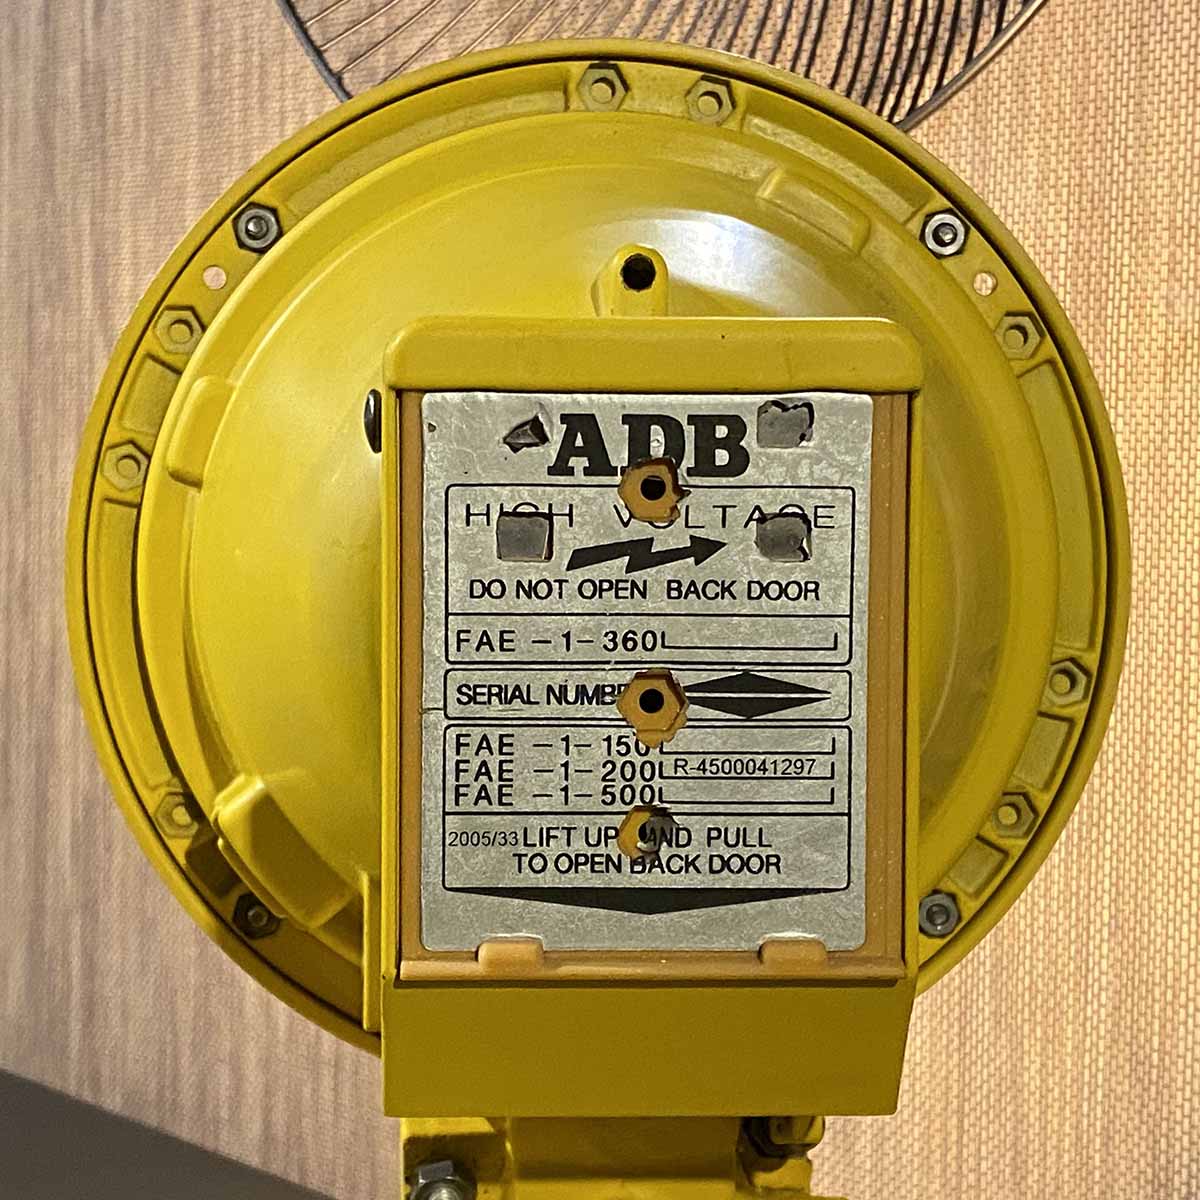 Back side of an ADB airport approach light, showing all details.